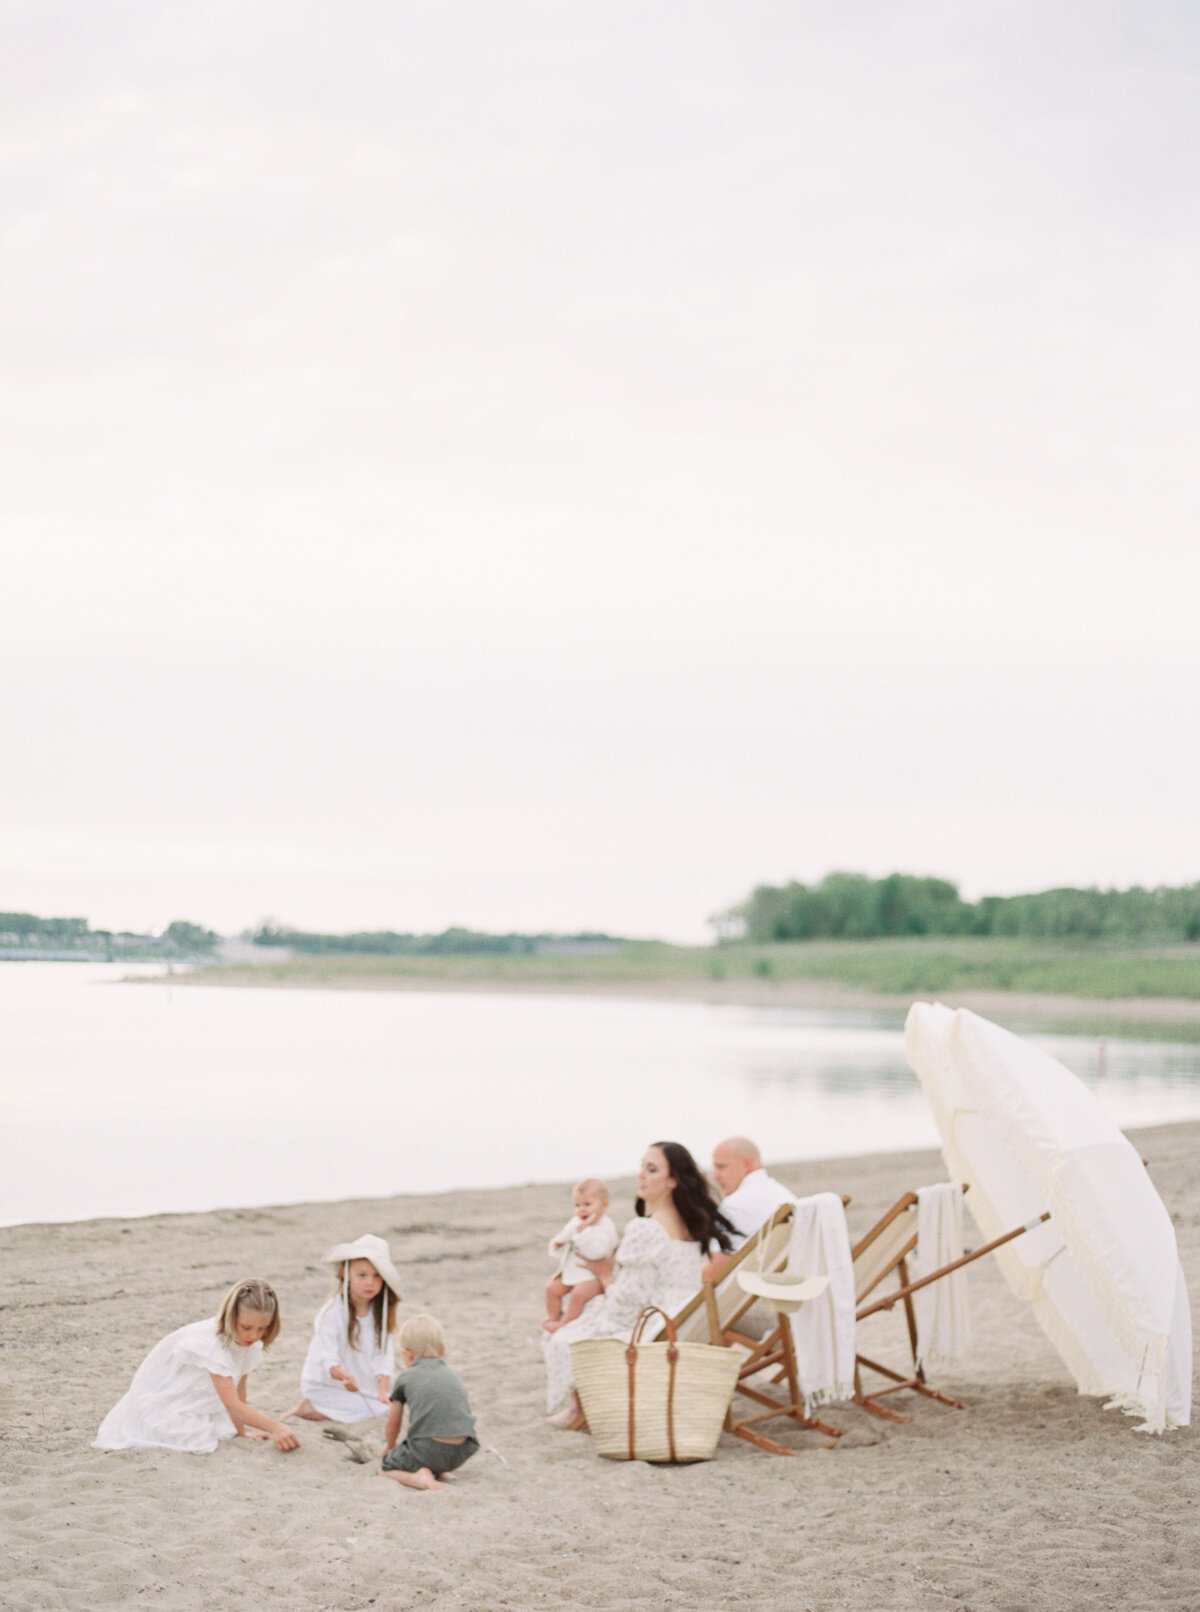 Family having a picnic by the water on the beach